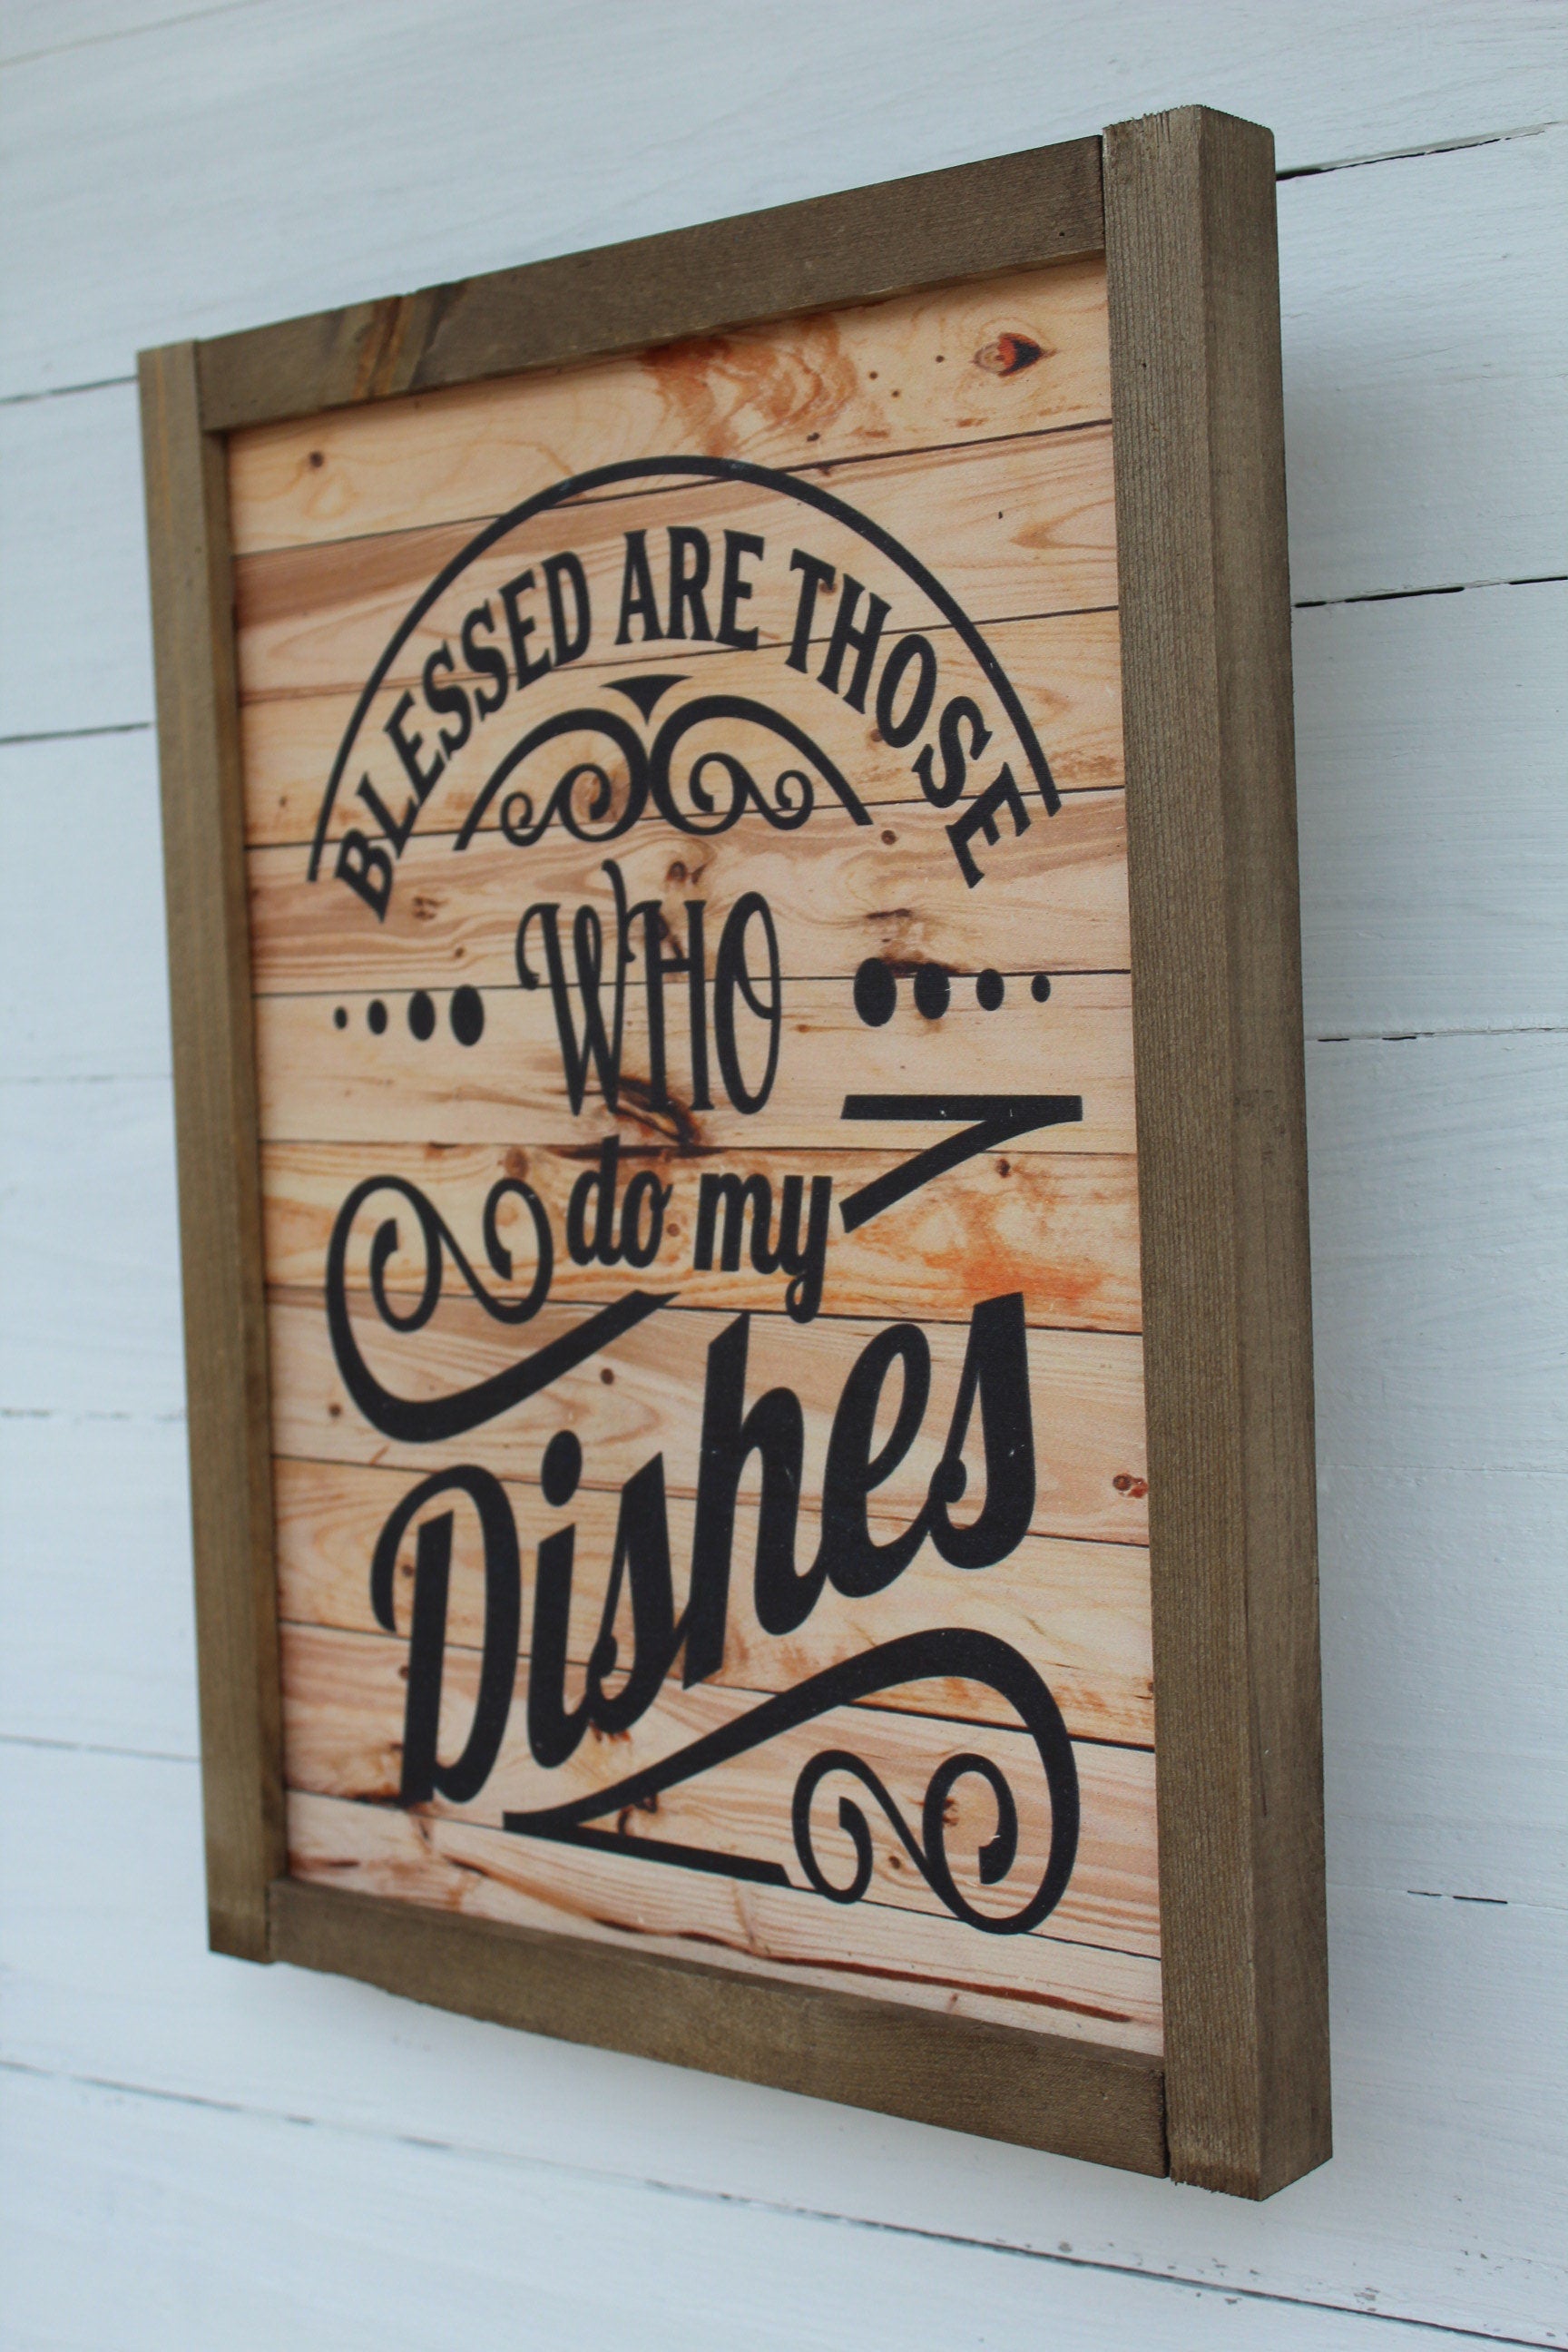 Funny kitchen decor-funny farmhouse signs-funny kitchen sign-funny